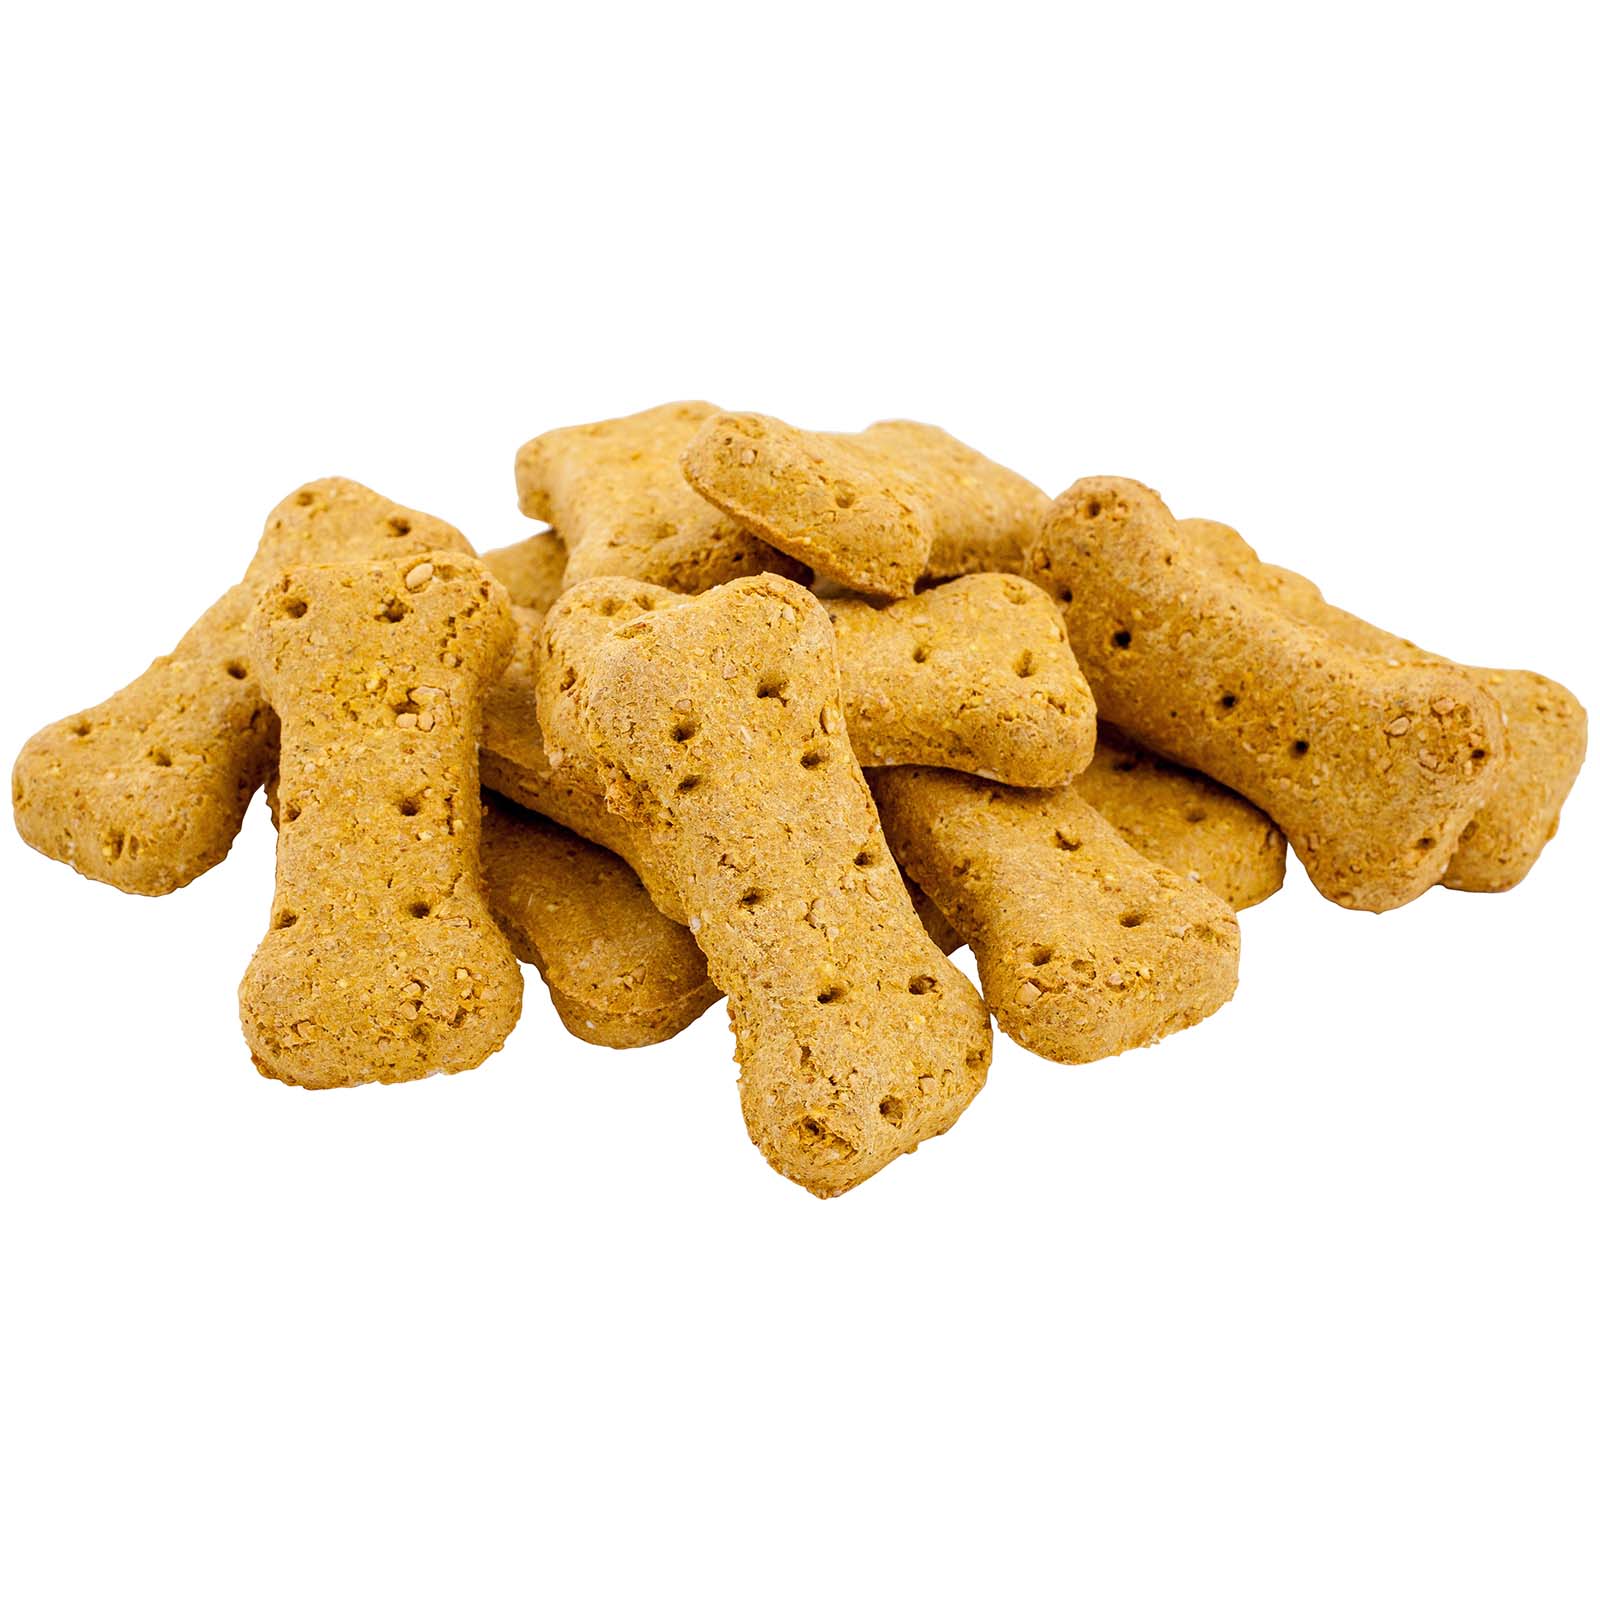 Black Dog Naturally Baked Cheese Australian Biscuit Treats for Dogs - 5kg image 0